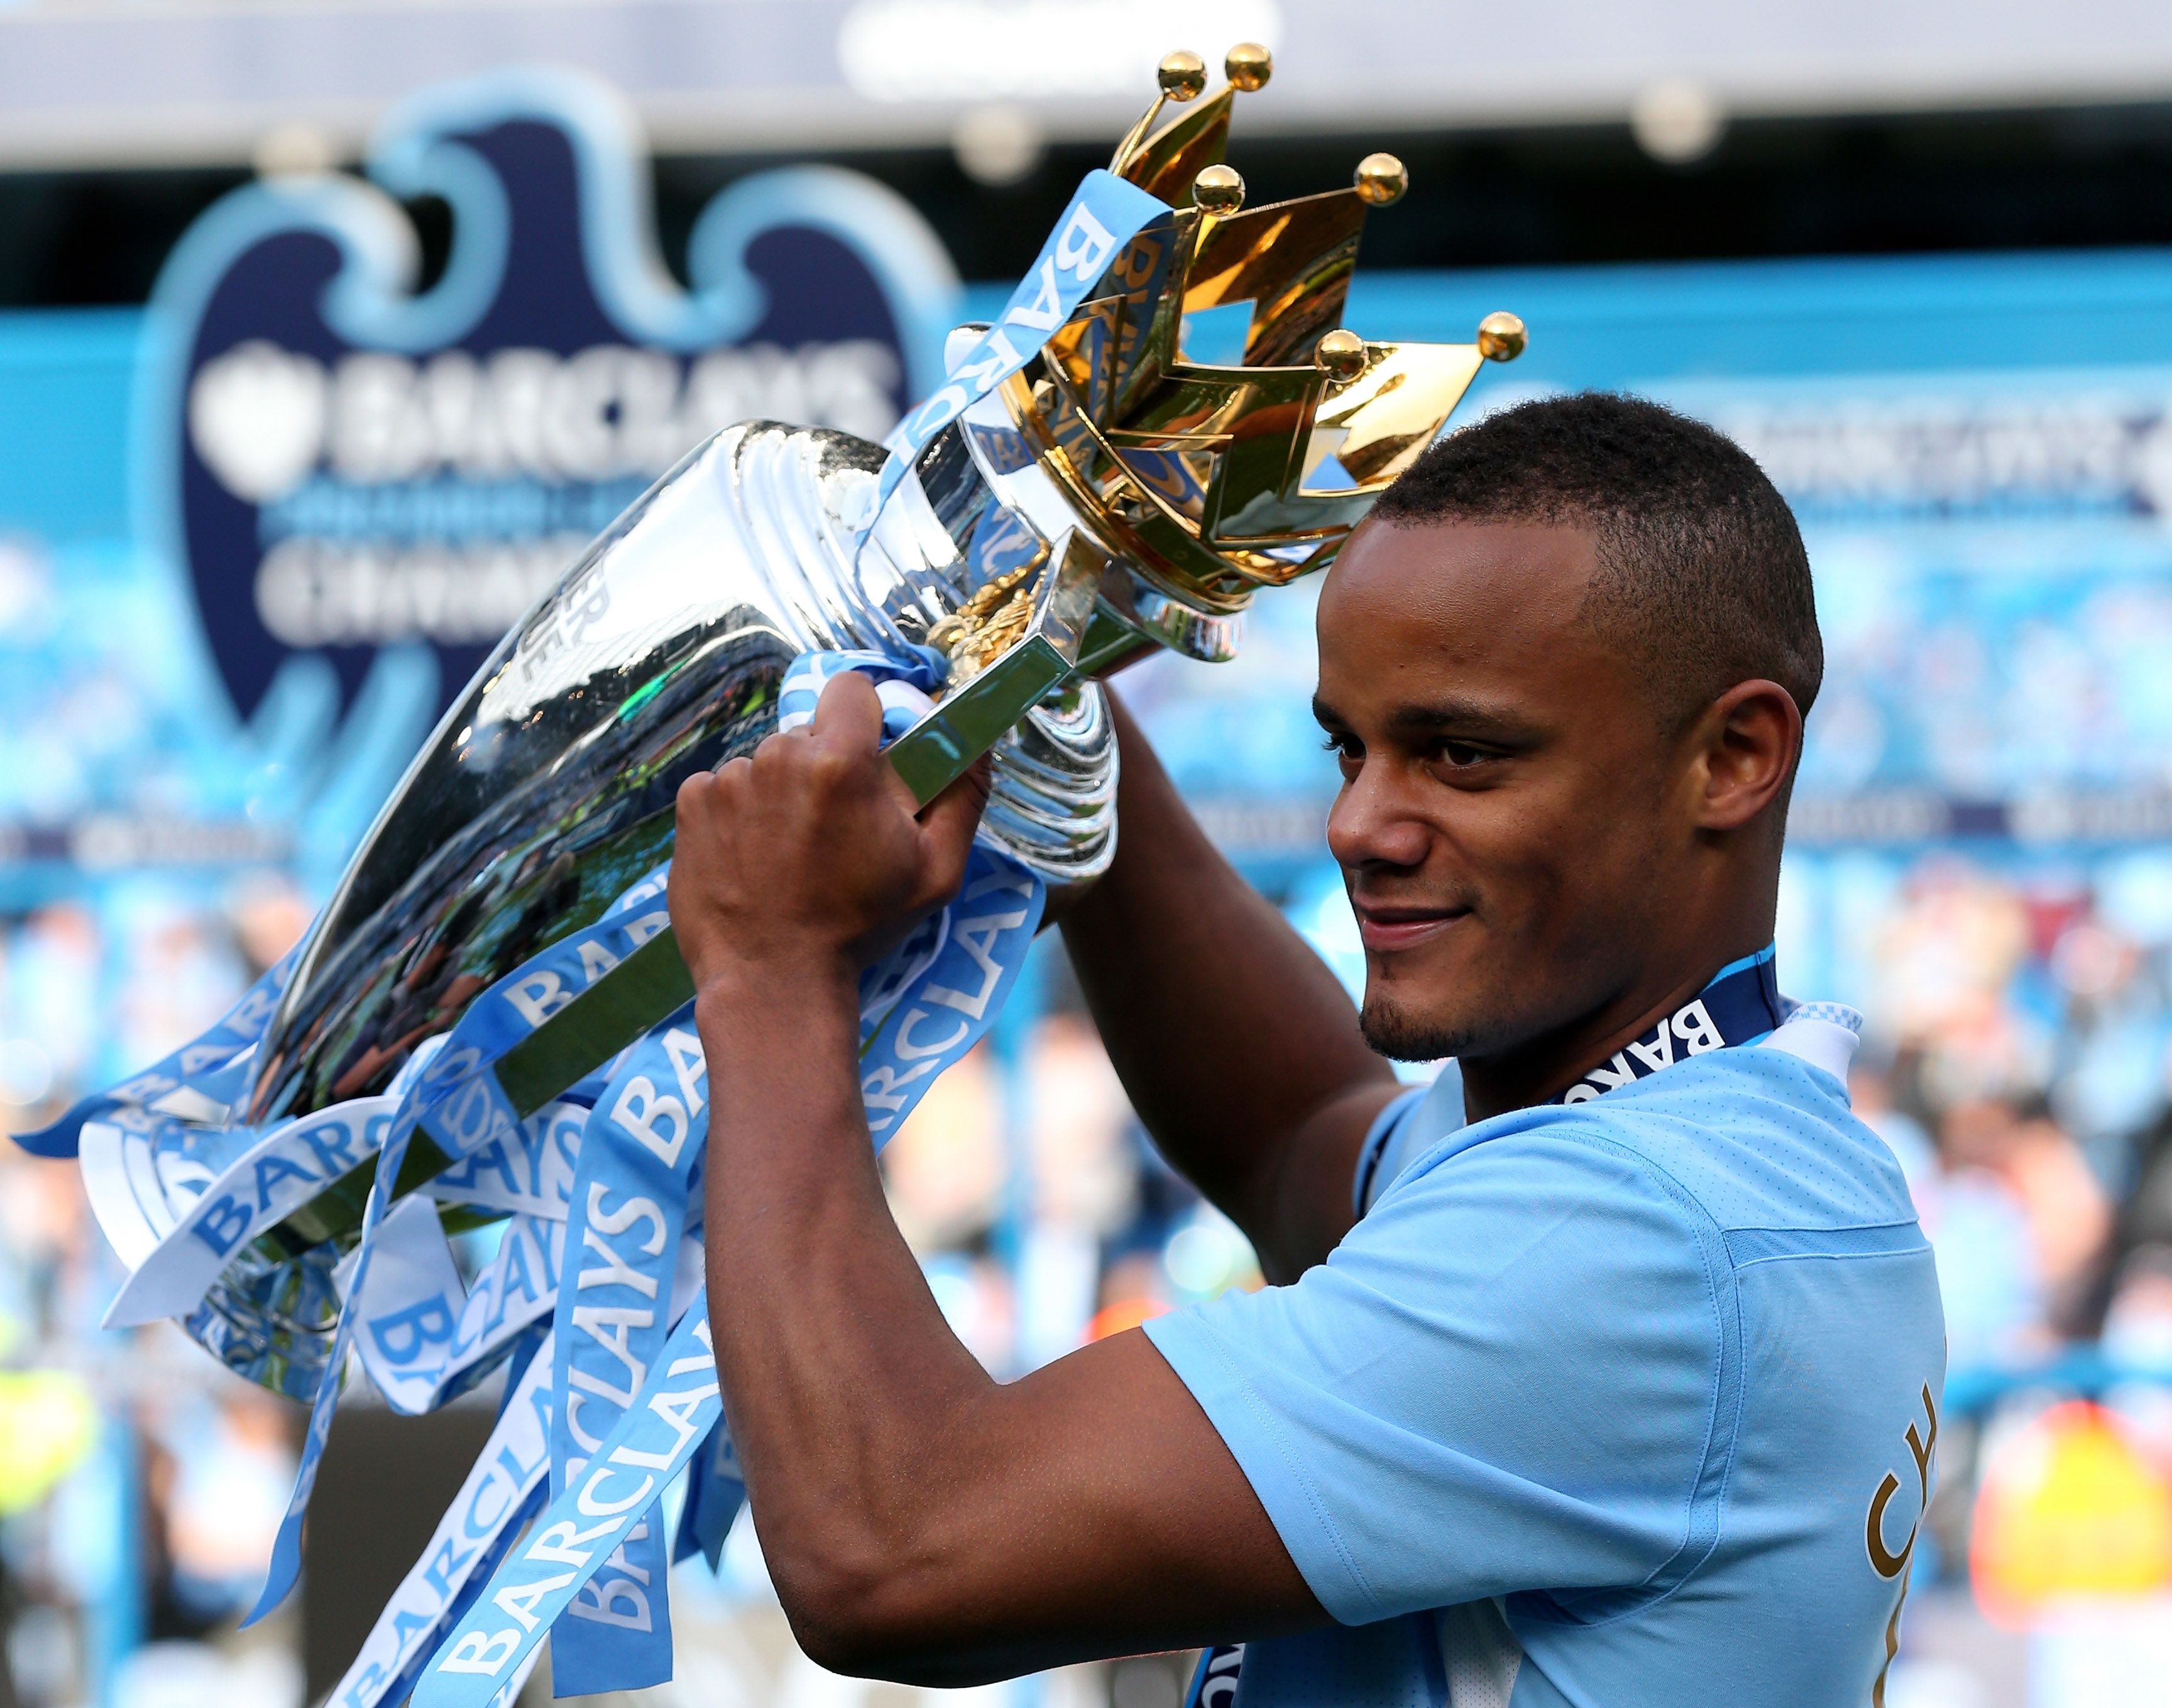 Man City had 'absolute confidence' after 2011-12 title triumph - Kompany -  Sportstar